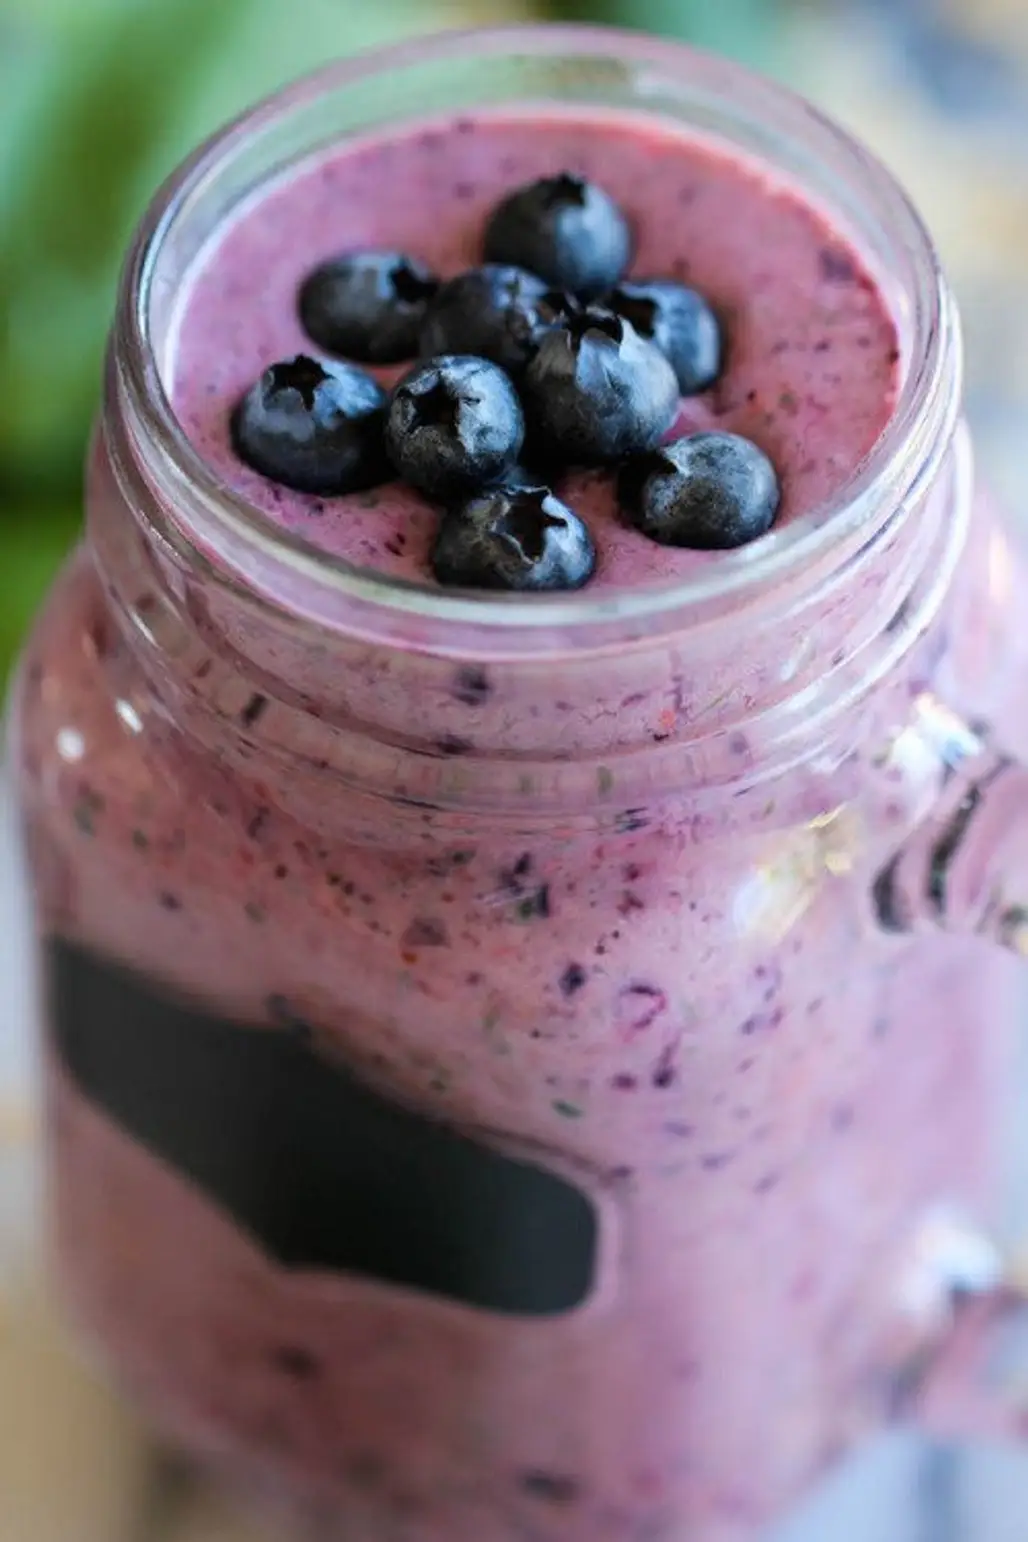 Frozen Berries Are an Affordable Alternative to Fresh and Still Have All the Antioxidants